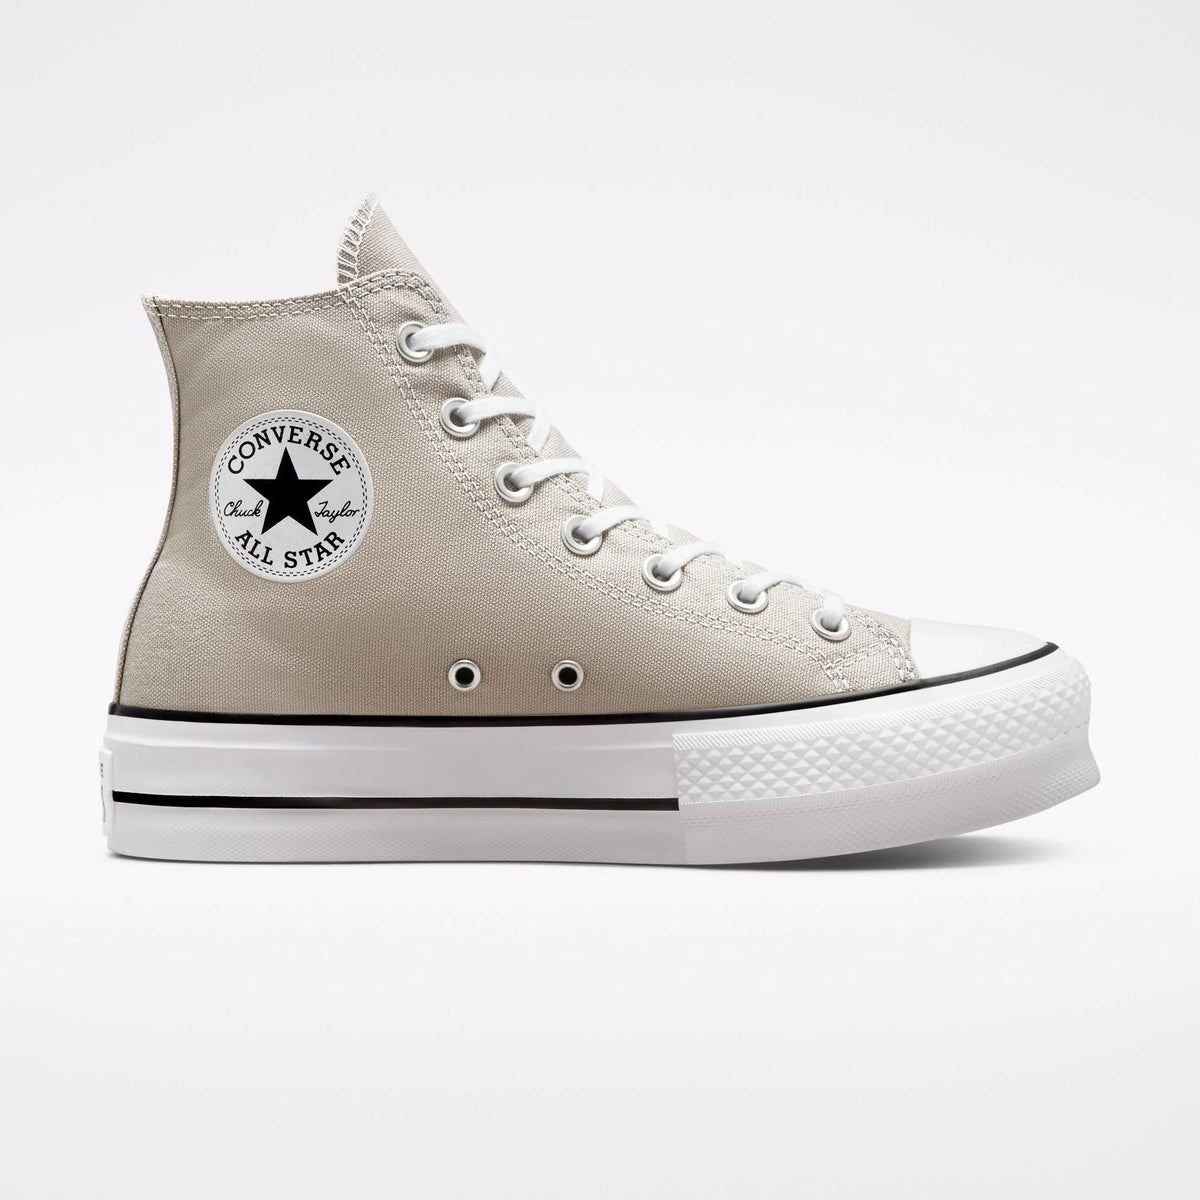 Chuck Taylor All Star Canvas Lift Low Top White | Canvas shoes outfit,  White converse shoes, Outfit shoes